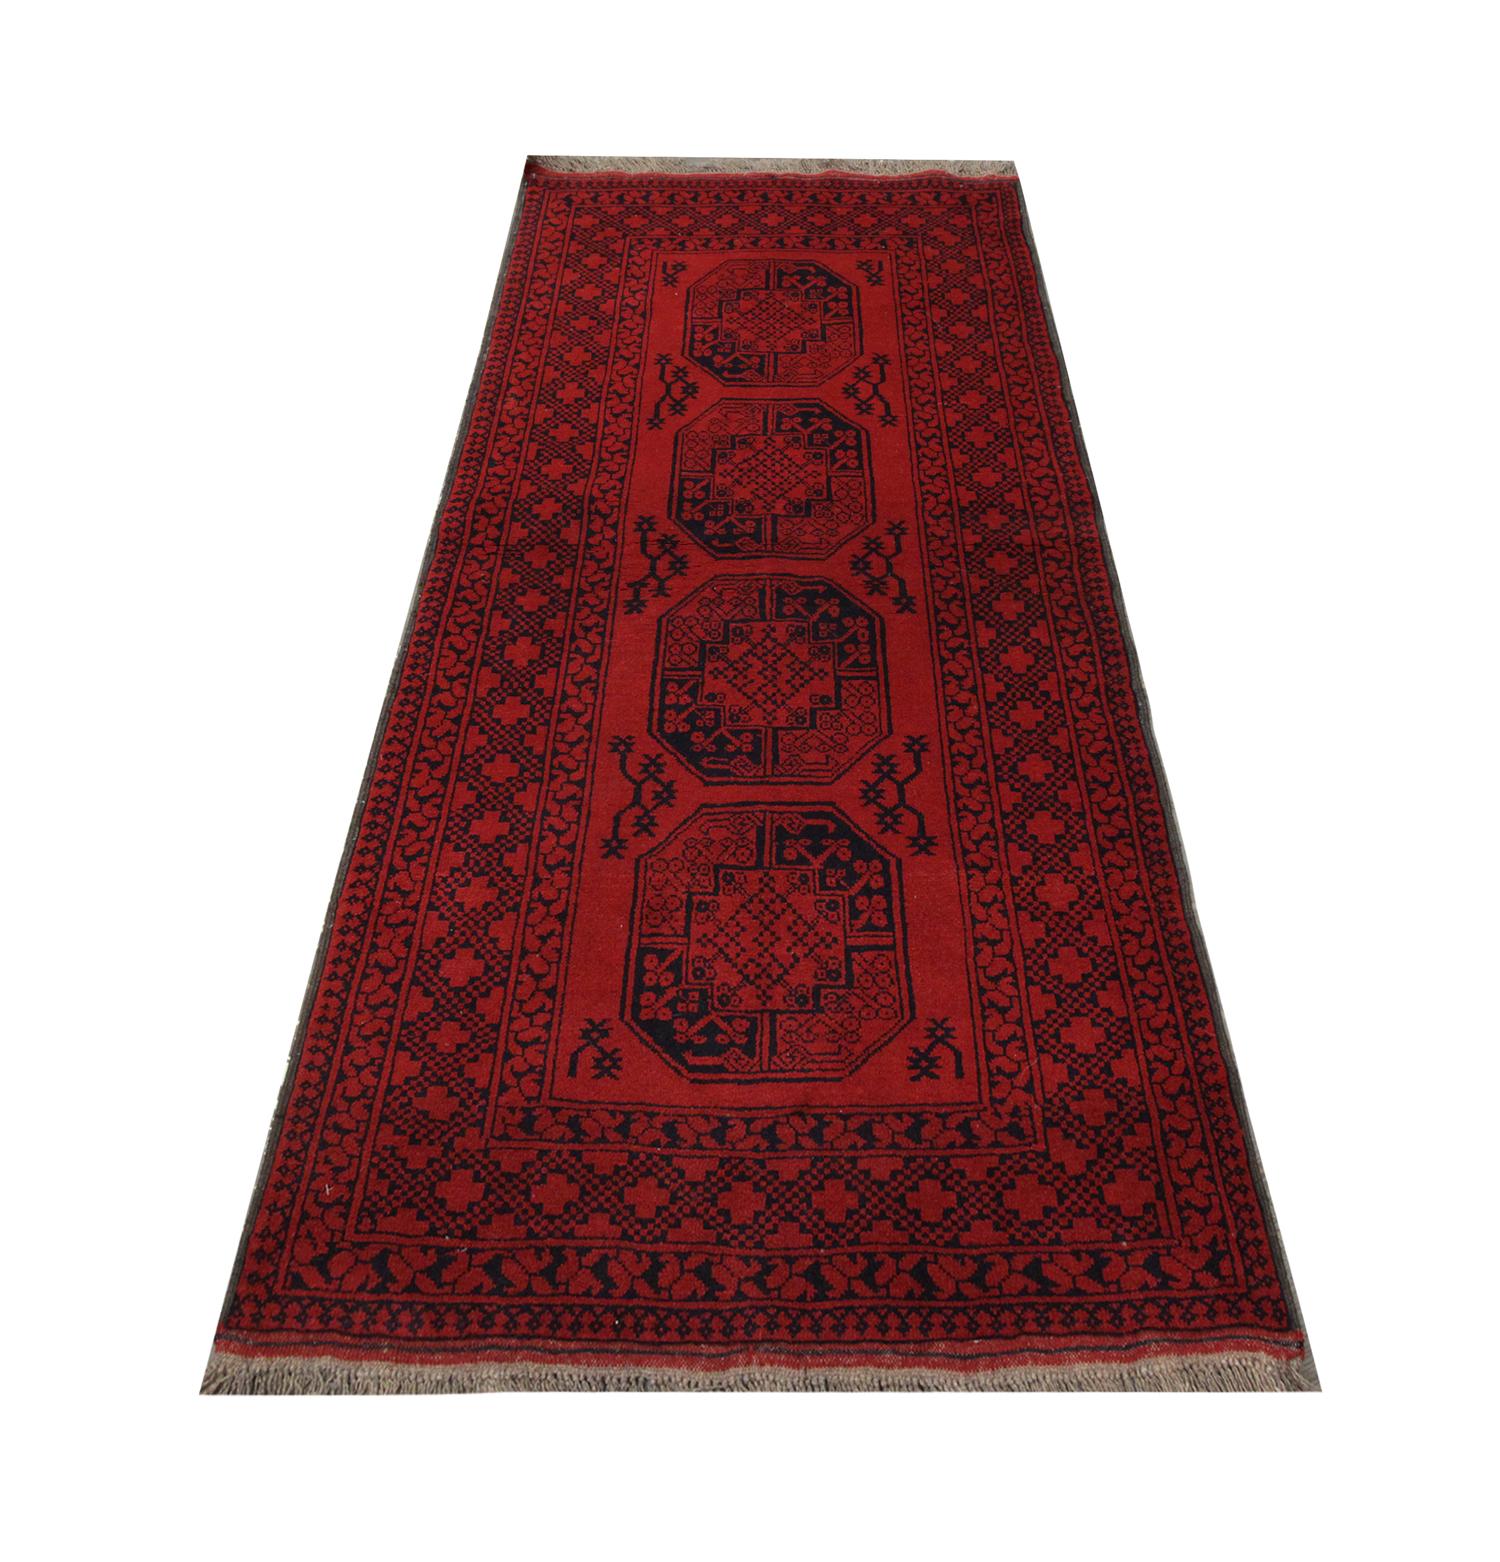 Style your floors with handmade carpet Oriental rug this high-quality vintage Afghan Turkmen tribal design rug, with a geometric symmetrical design, handwoven in 1970 with hand-spun, vegetable-dyed wool and cotton, by some of the finest artisans.